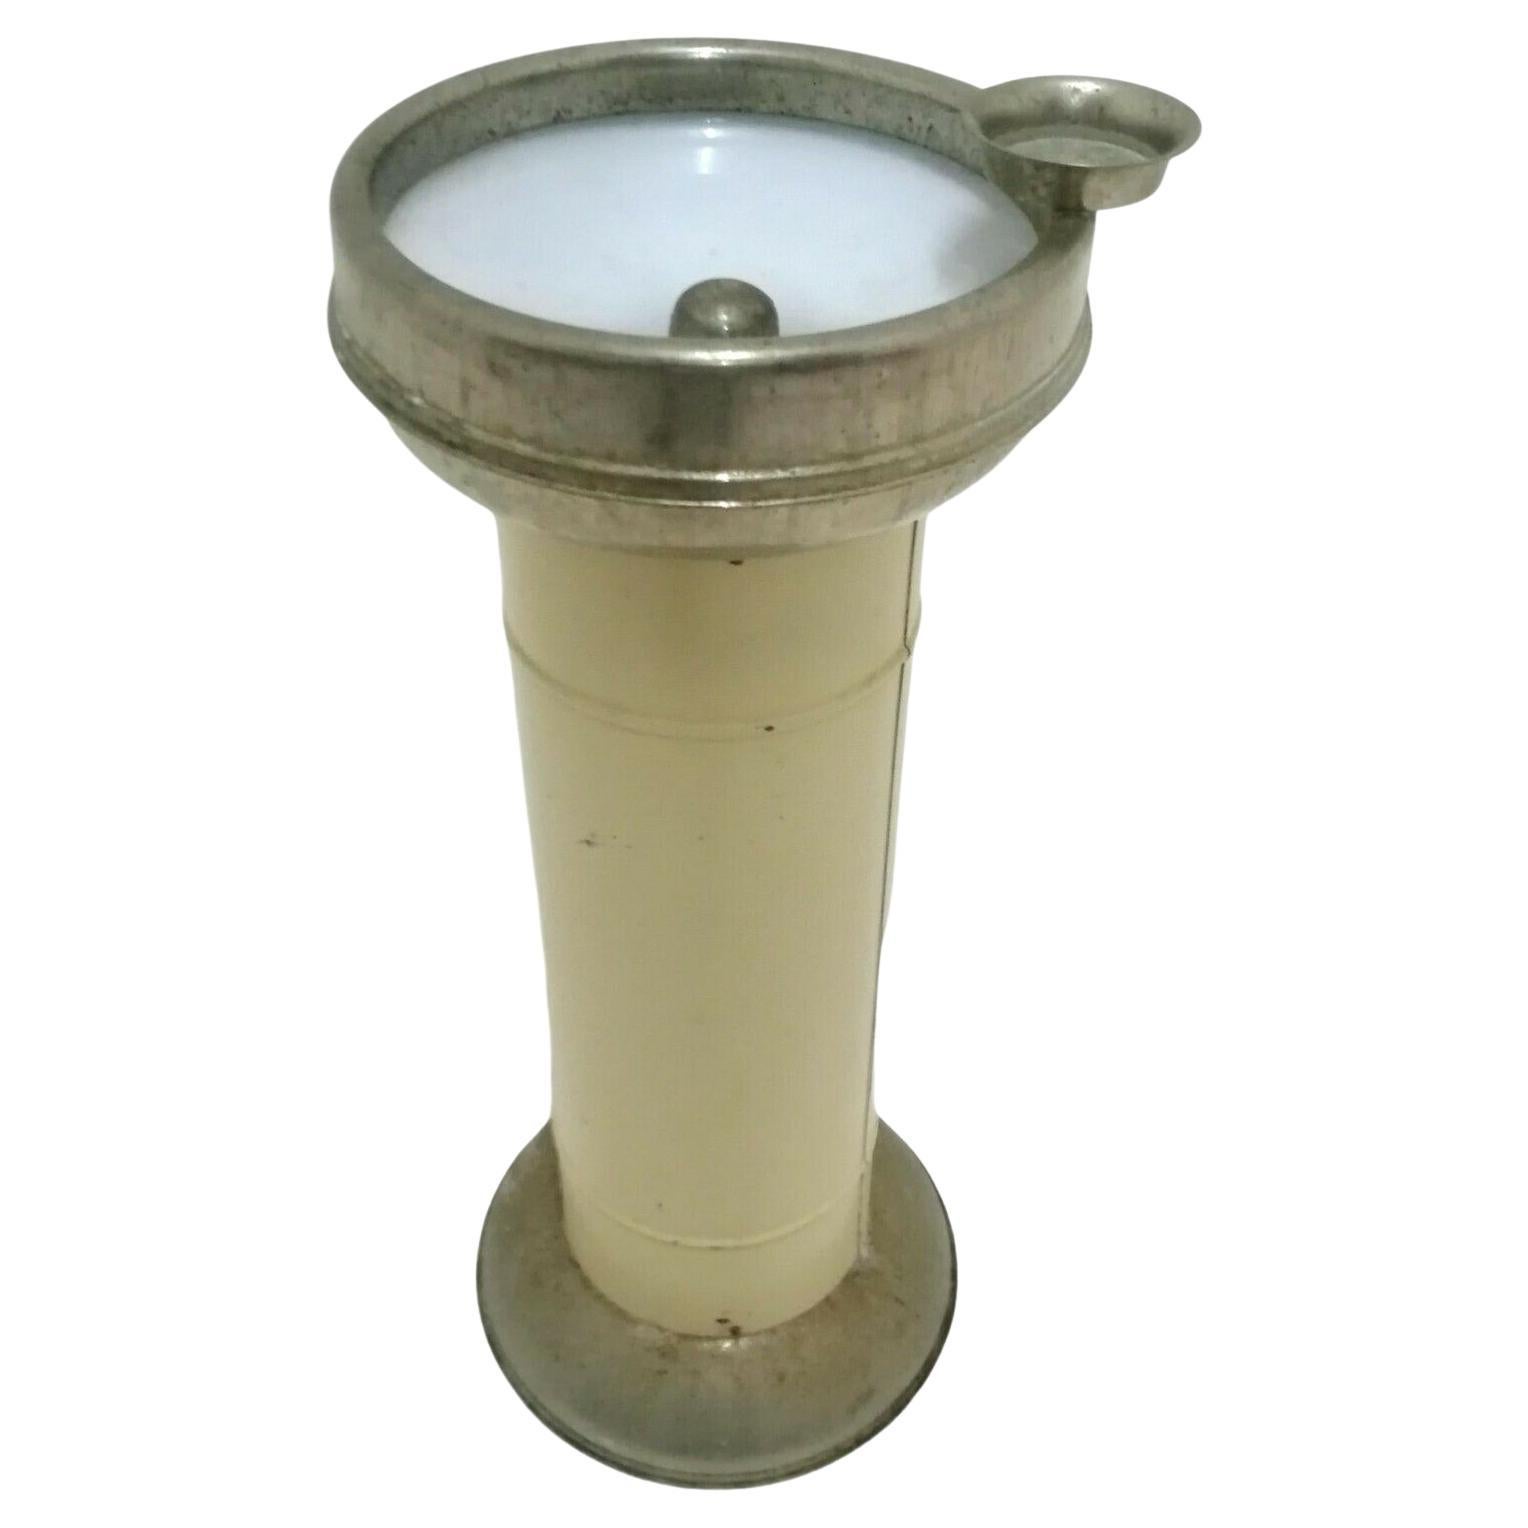 Rare Spittoon Column with Container Inside, 1920s